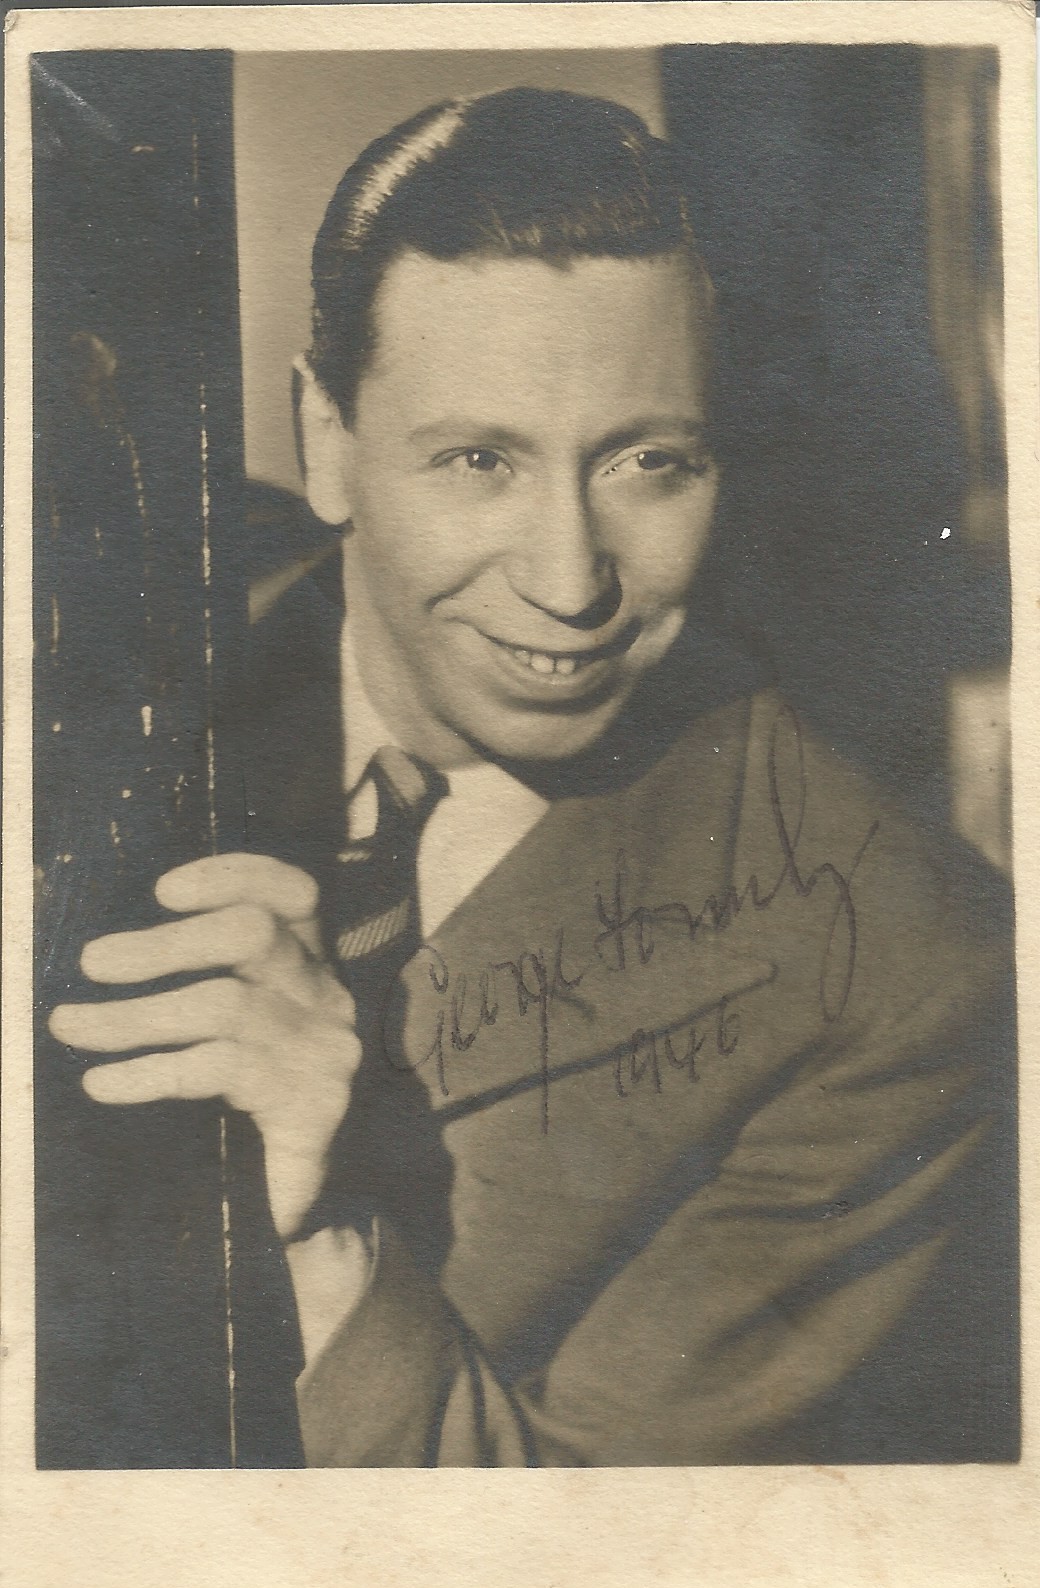 George Formby signed 6x4 vintage sepia photo.George Formby, OBE (born George Hoy Booth; 26 May